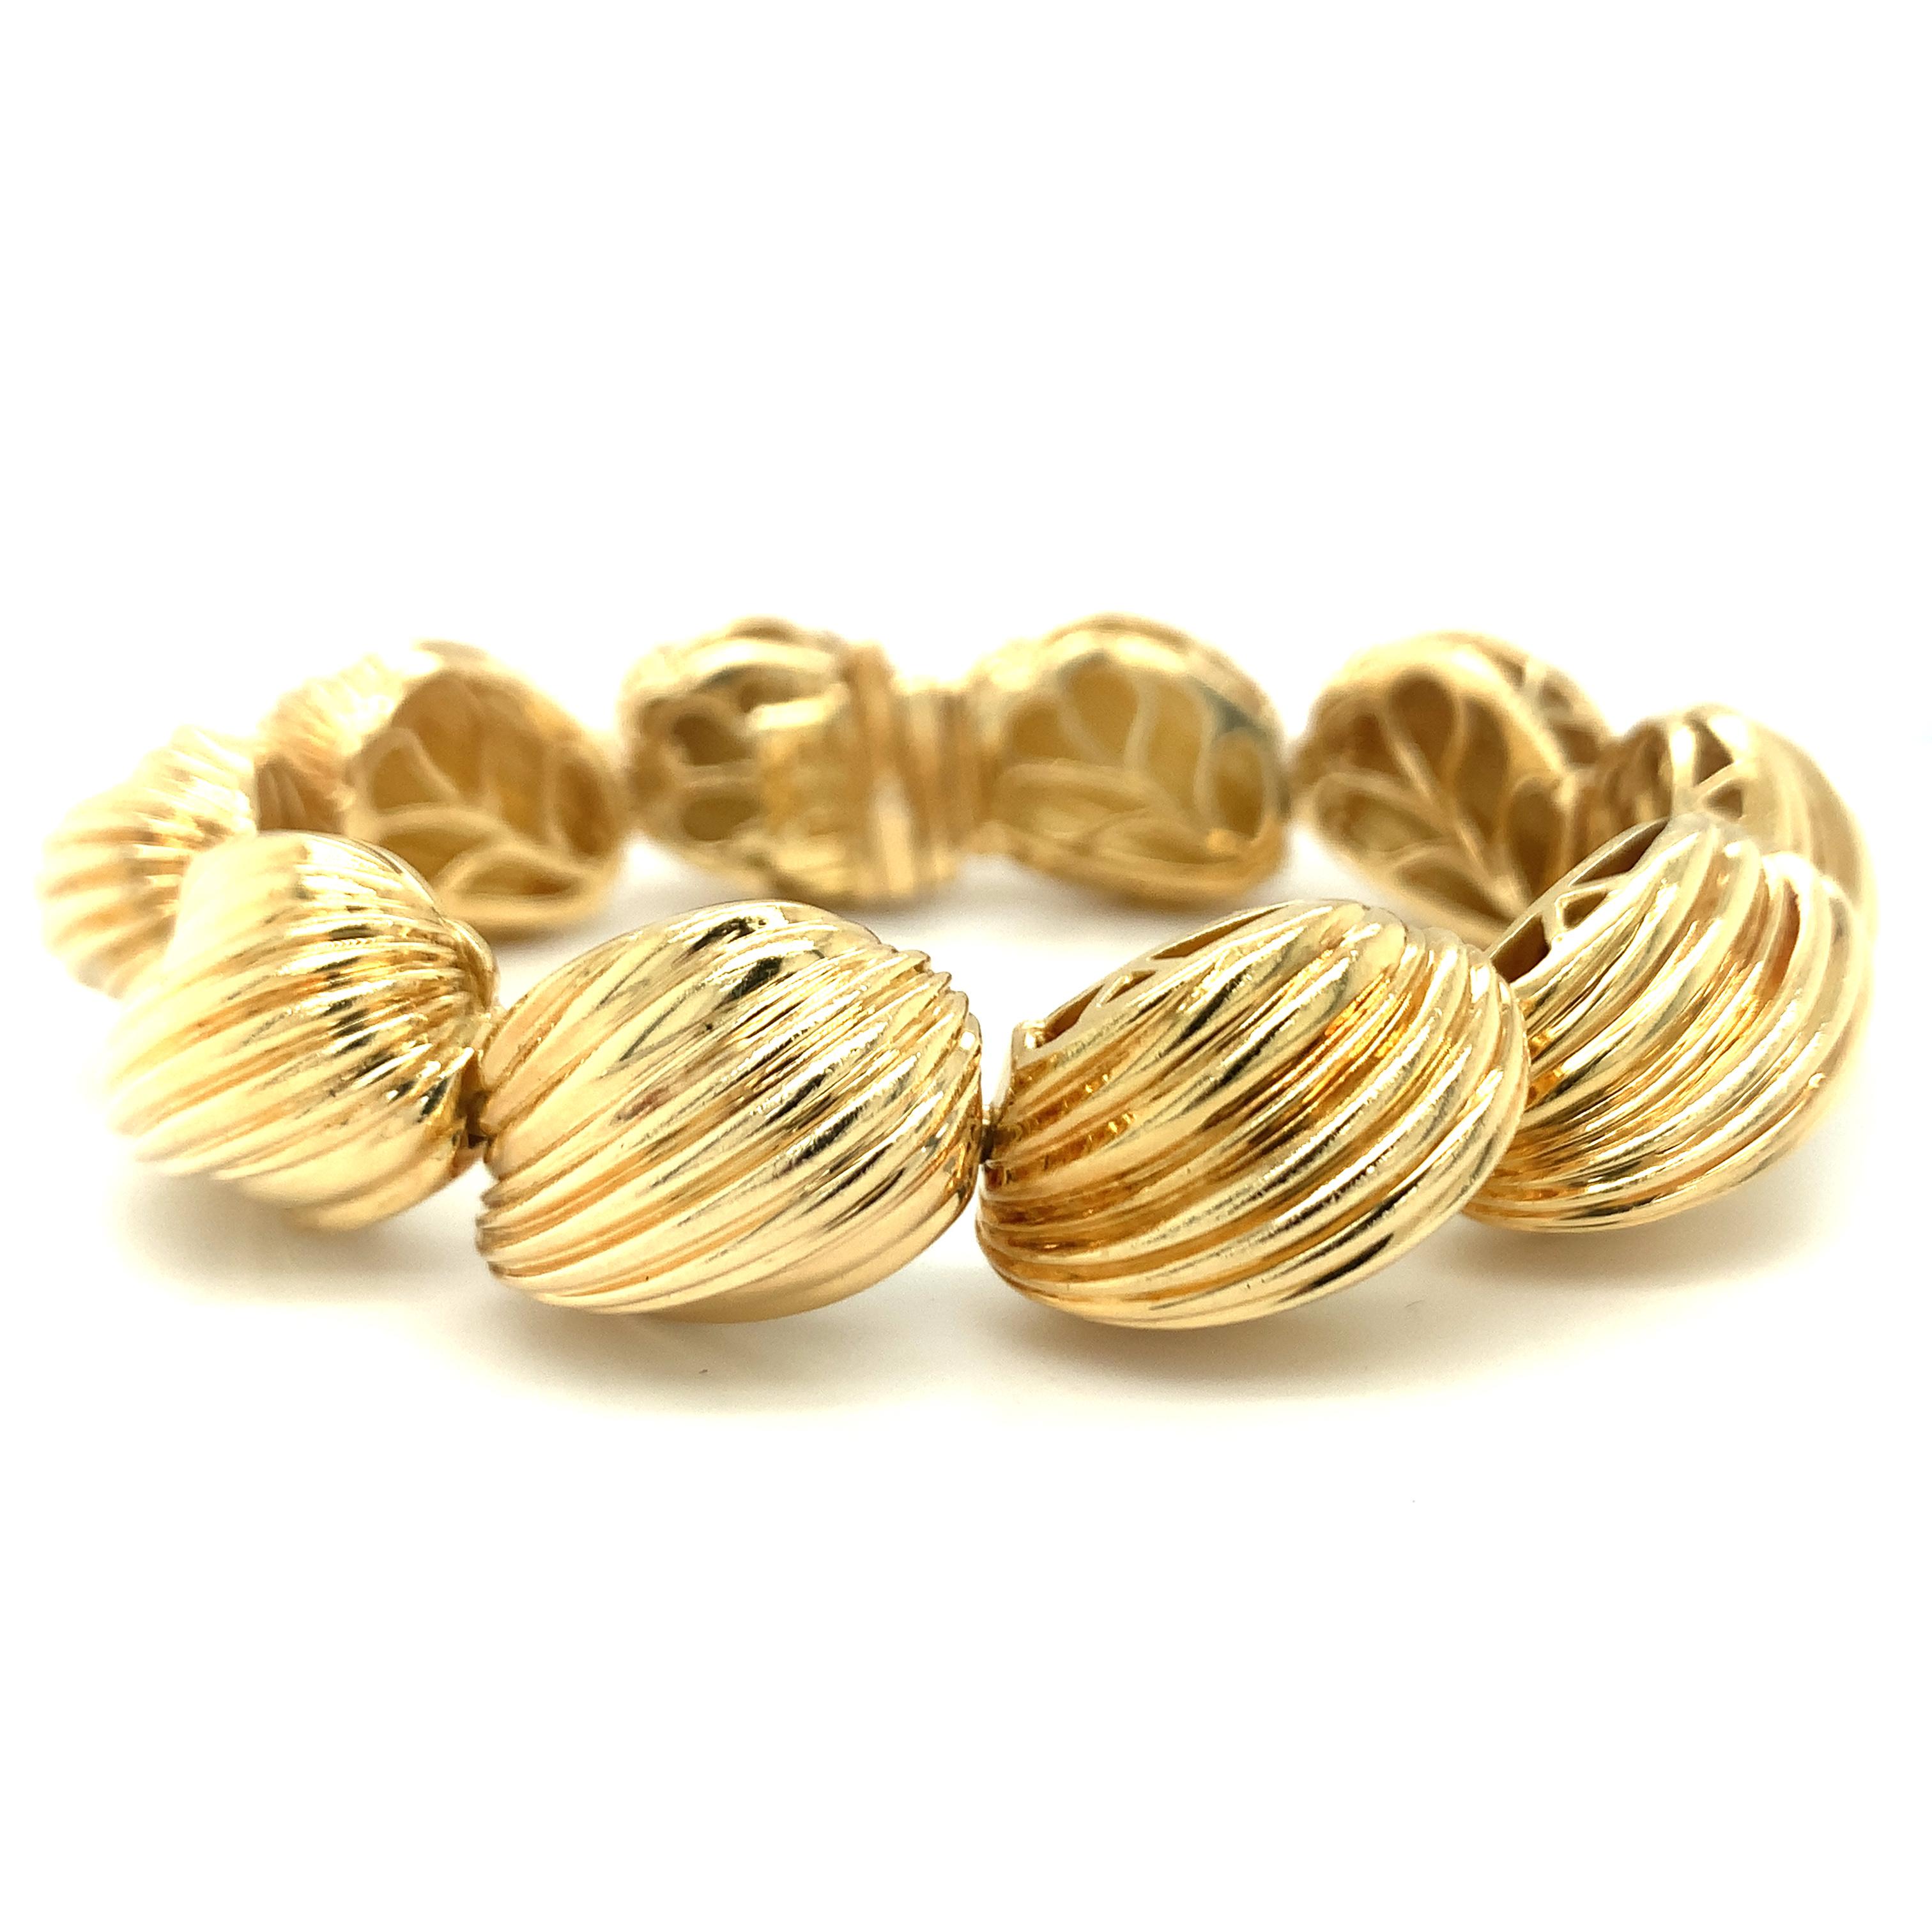 One shell motif link 18K yellow gold bracelet by Hammerman Brothers featuring ten ribbed and high polish gold links measuring 15 mm. wide and 12 mm. tall. Circa 1960s.

Pristine, golden, chic.

Metal: 18K yellow gold
Circa: 1960s
Stamp/Hallmark: